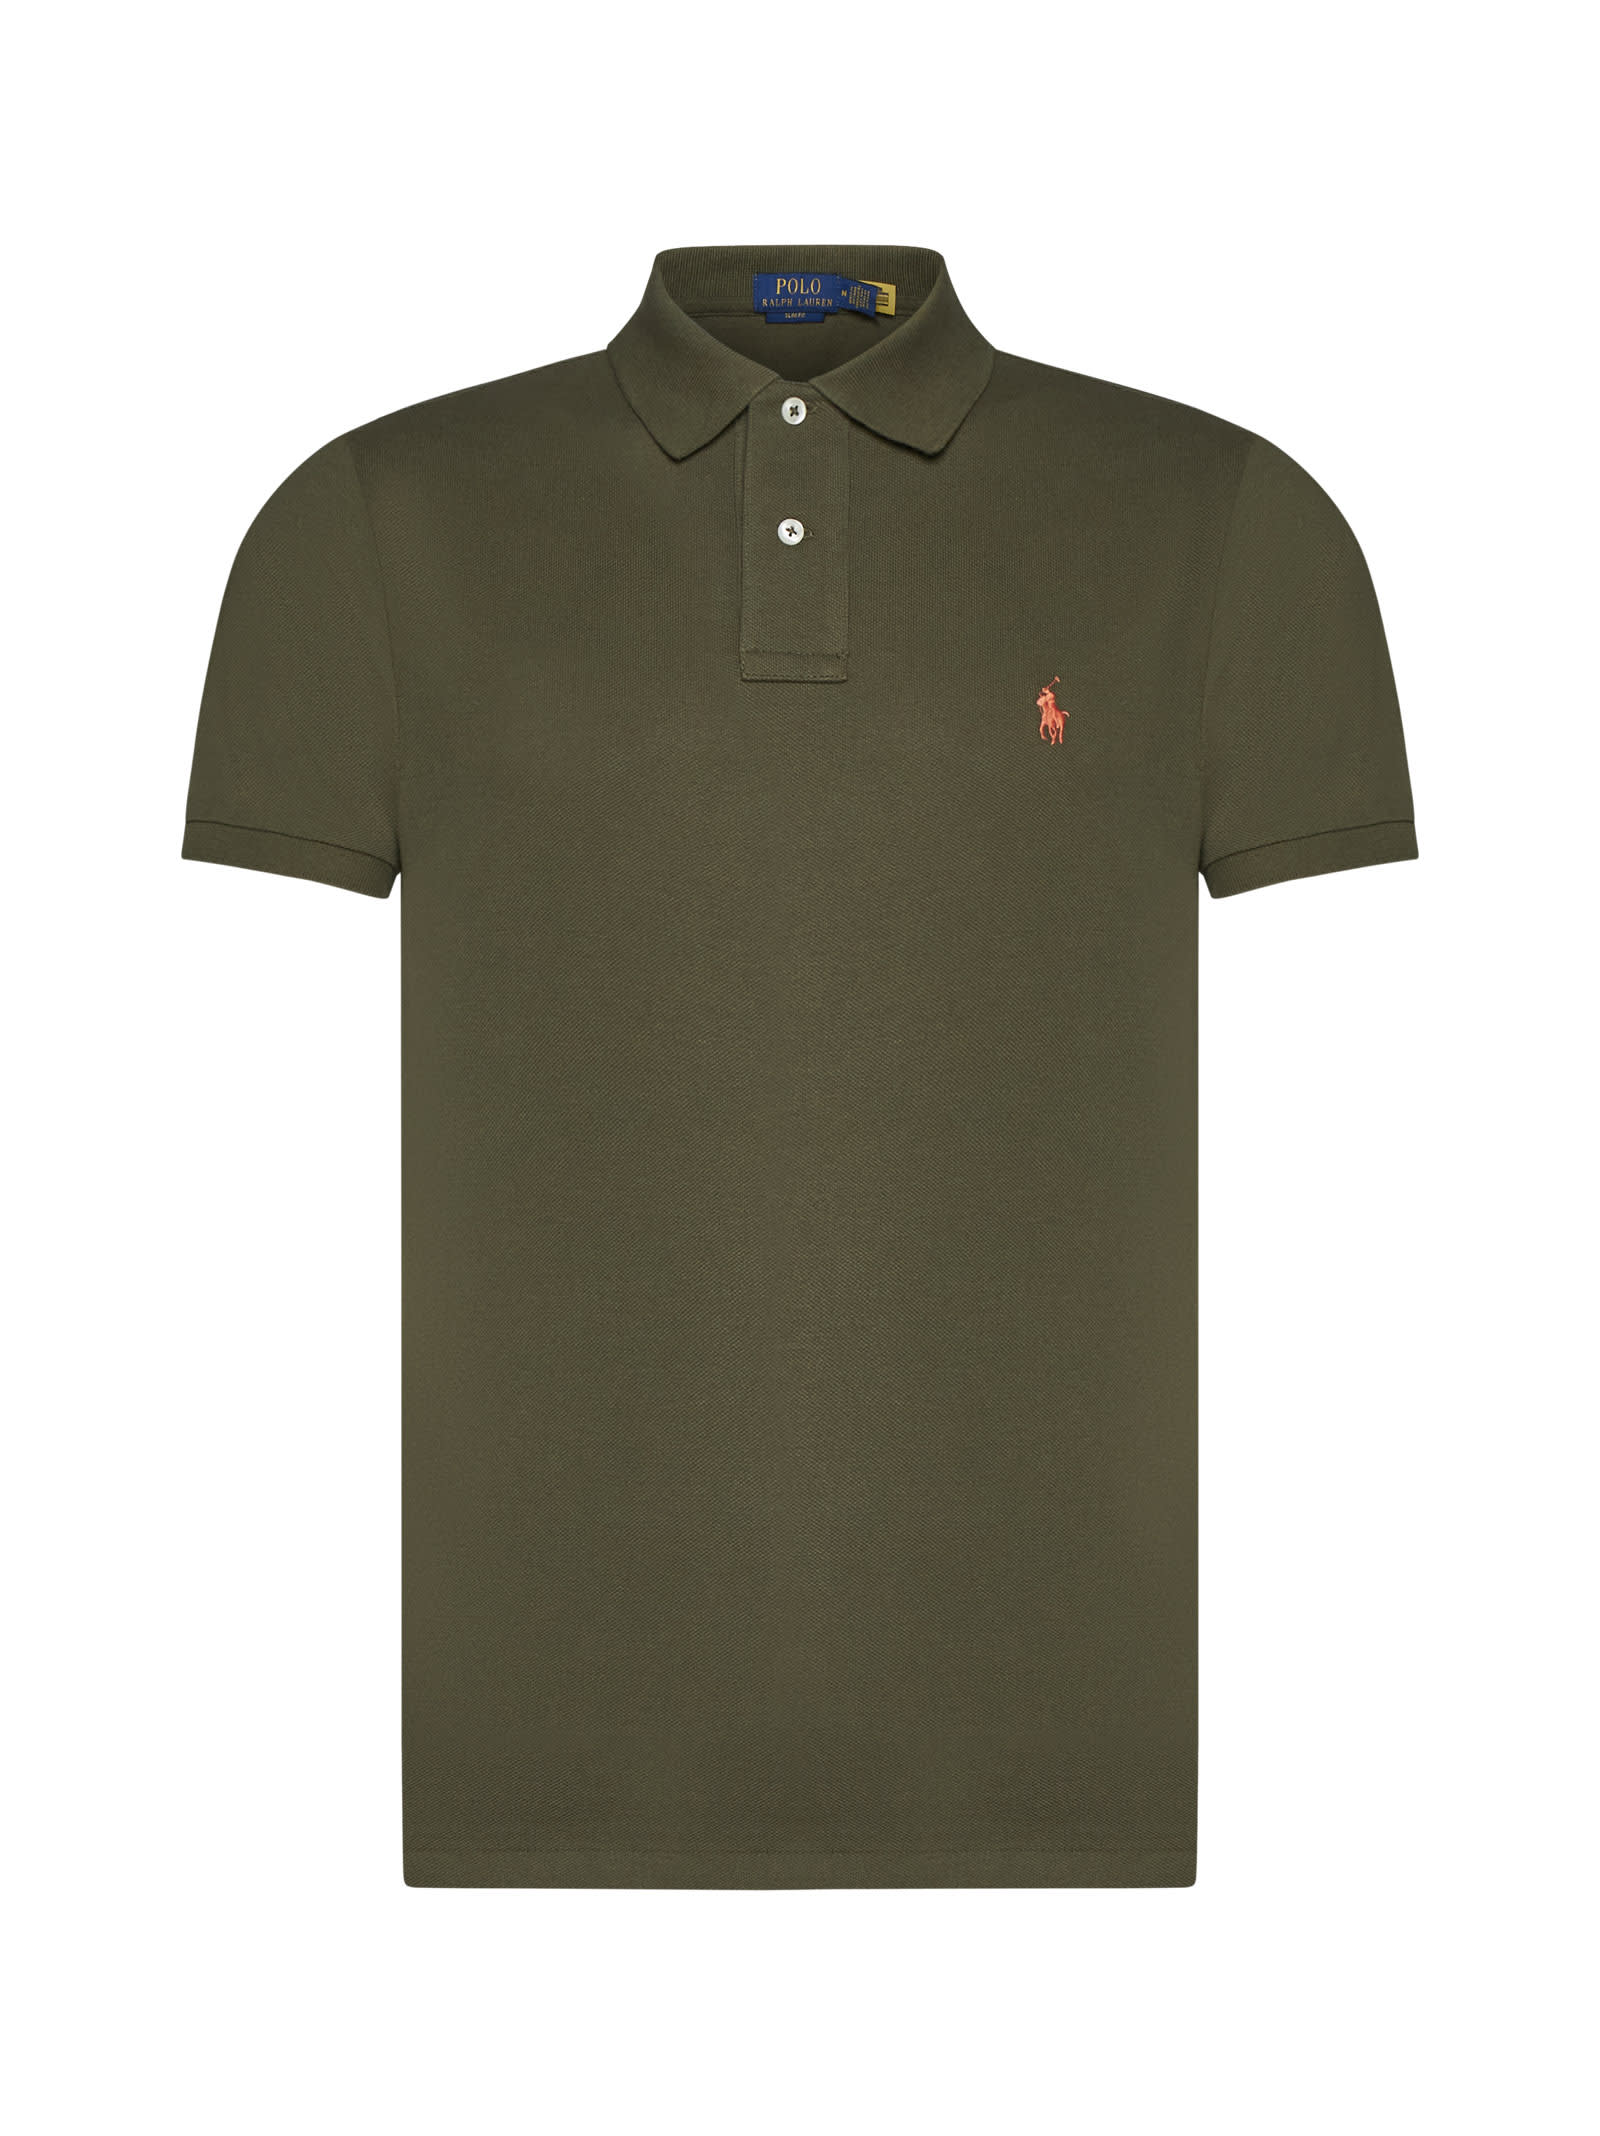 Shop Polo Ralph Lauren Polo Shirt In Canopy Olive C2226